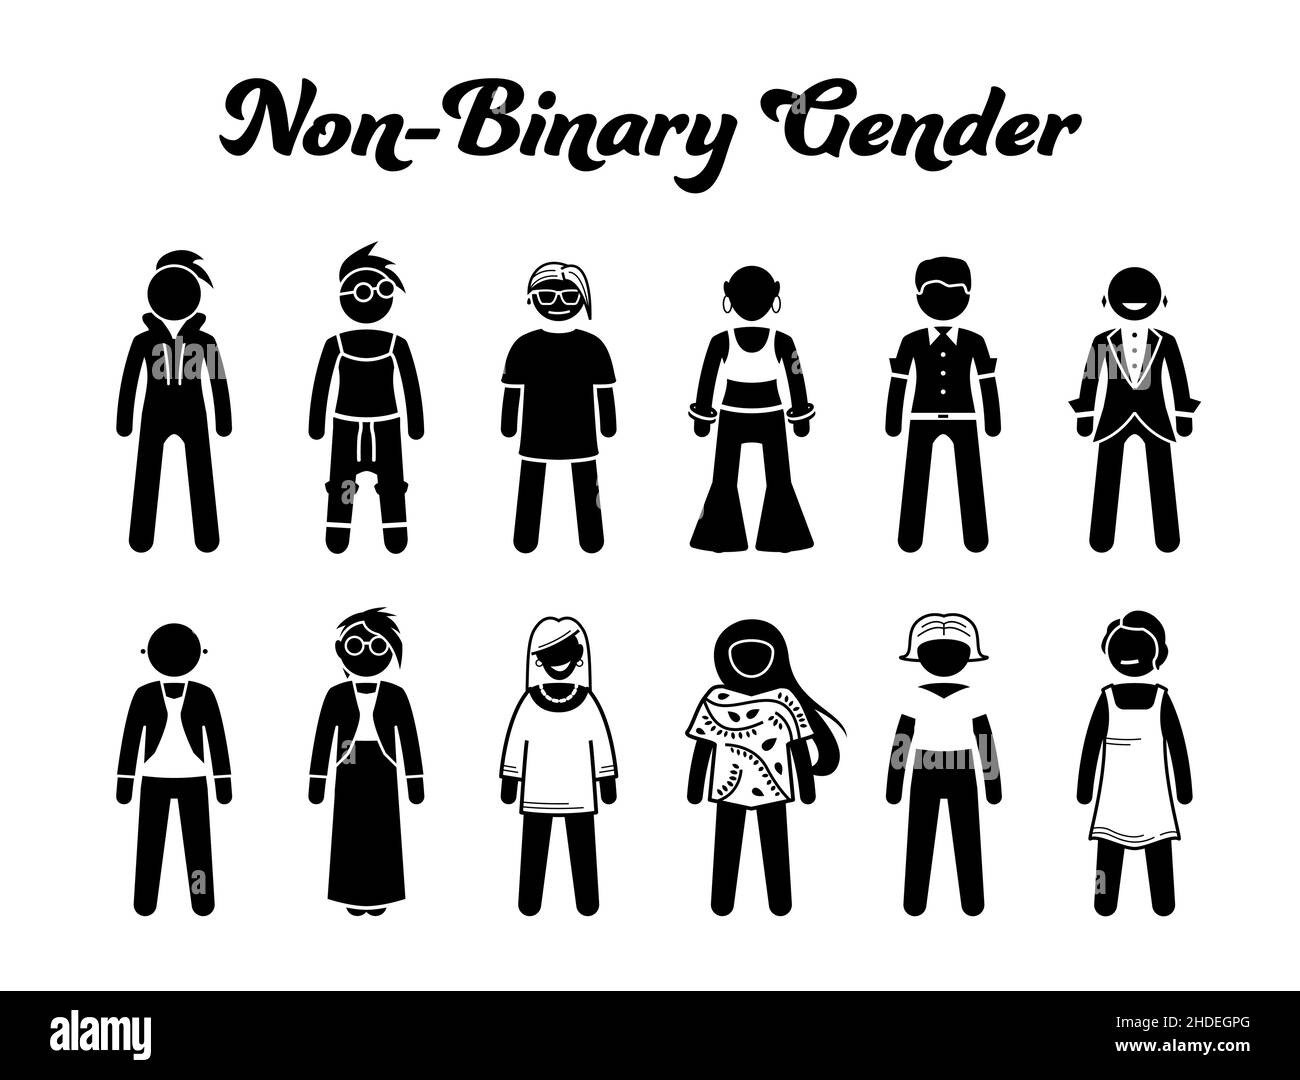 Nonbinary or non-binary gender character icon designs. Vector illustrations depicts human characters of nonbinary gender, LGBT, LGBTQ, transgender, ga Stock Vector